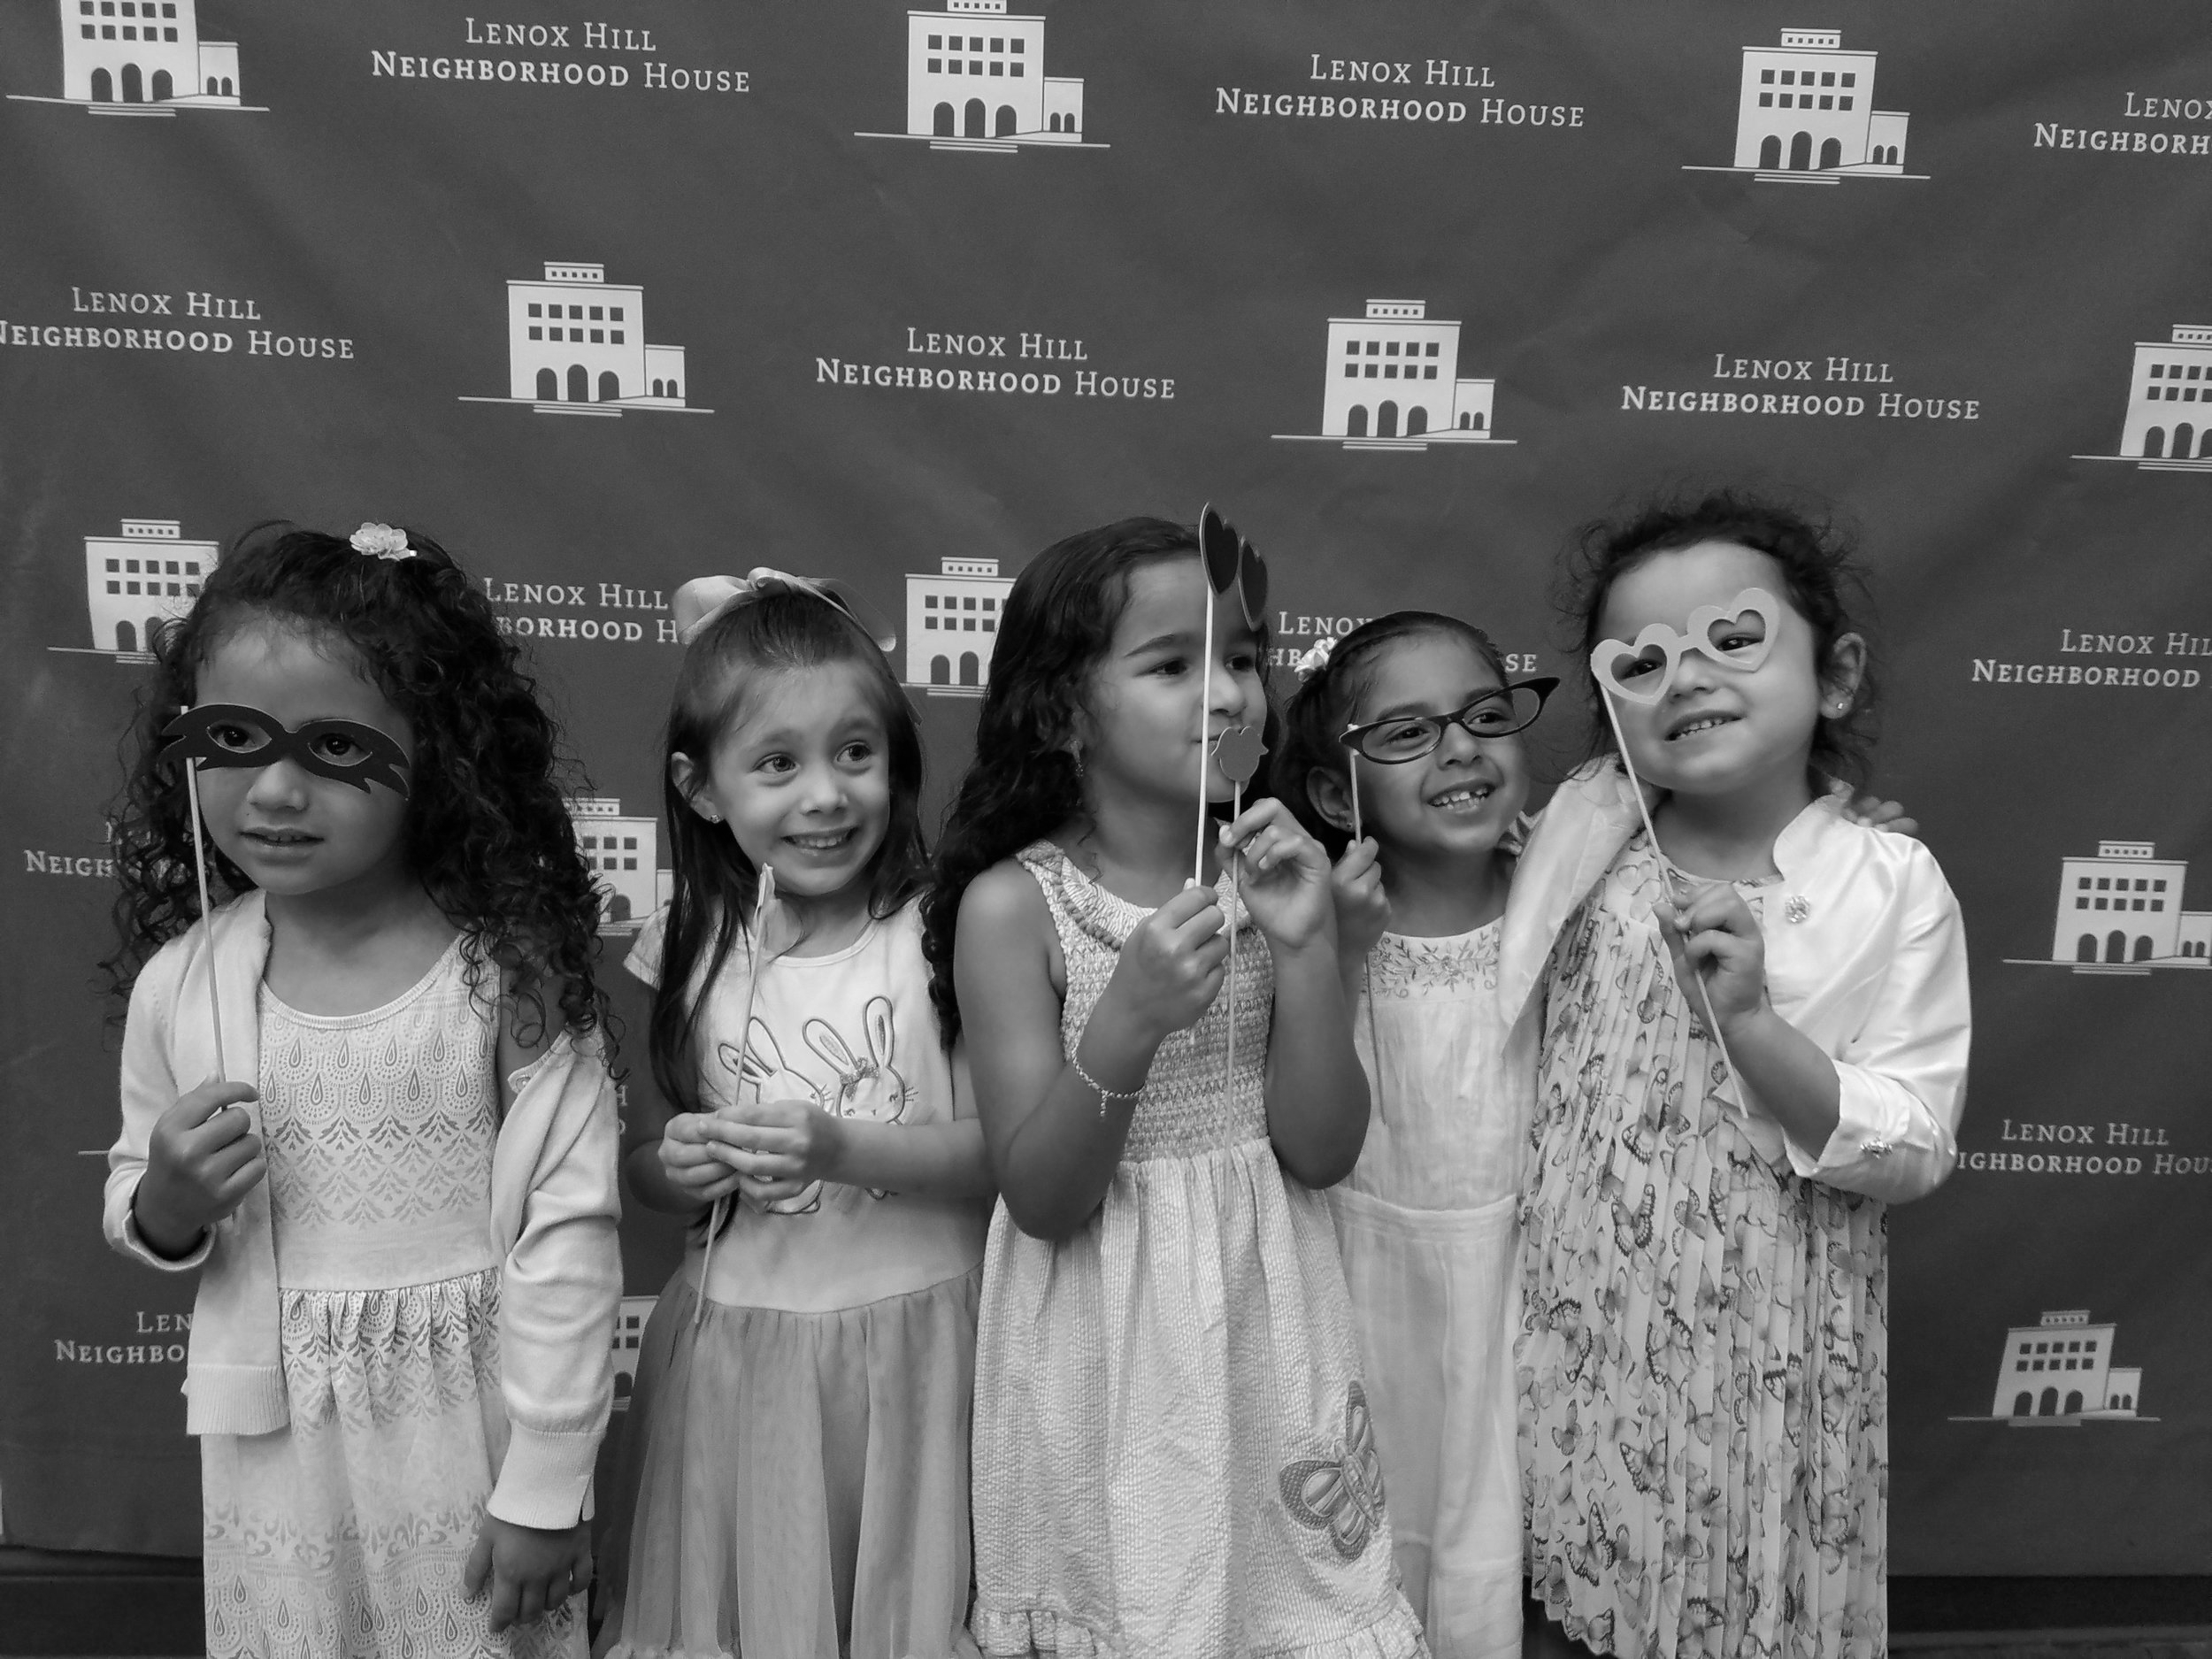 Group of Five Girls in Front of Neighborhood House Step and Repeat